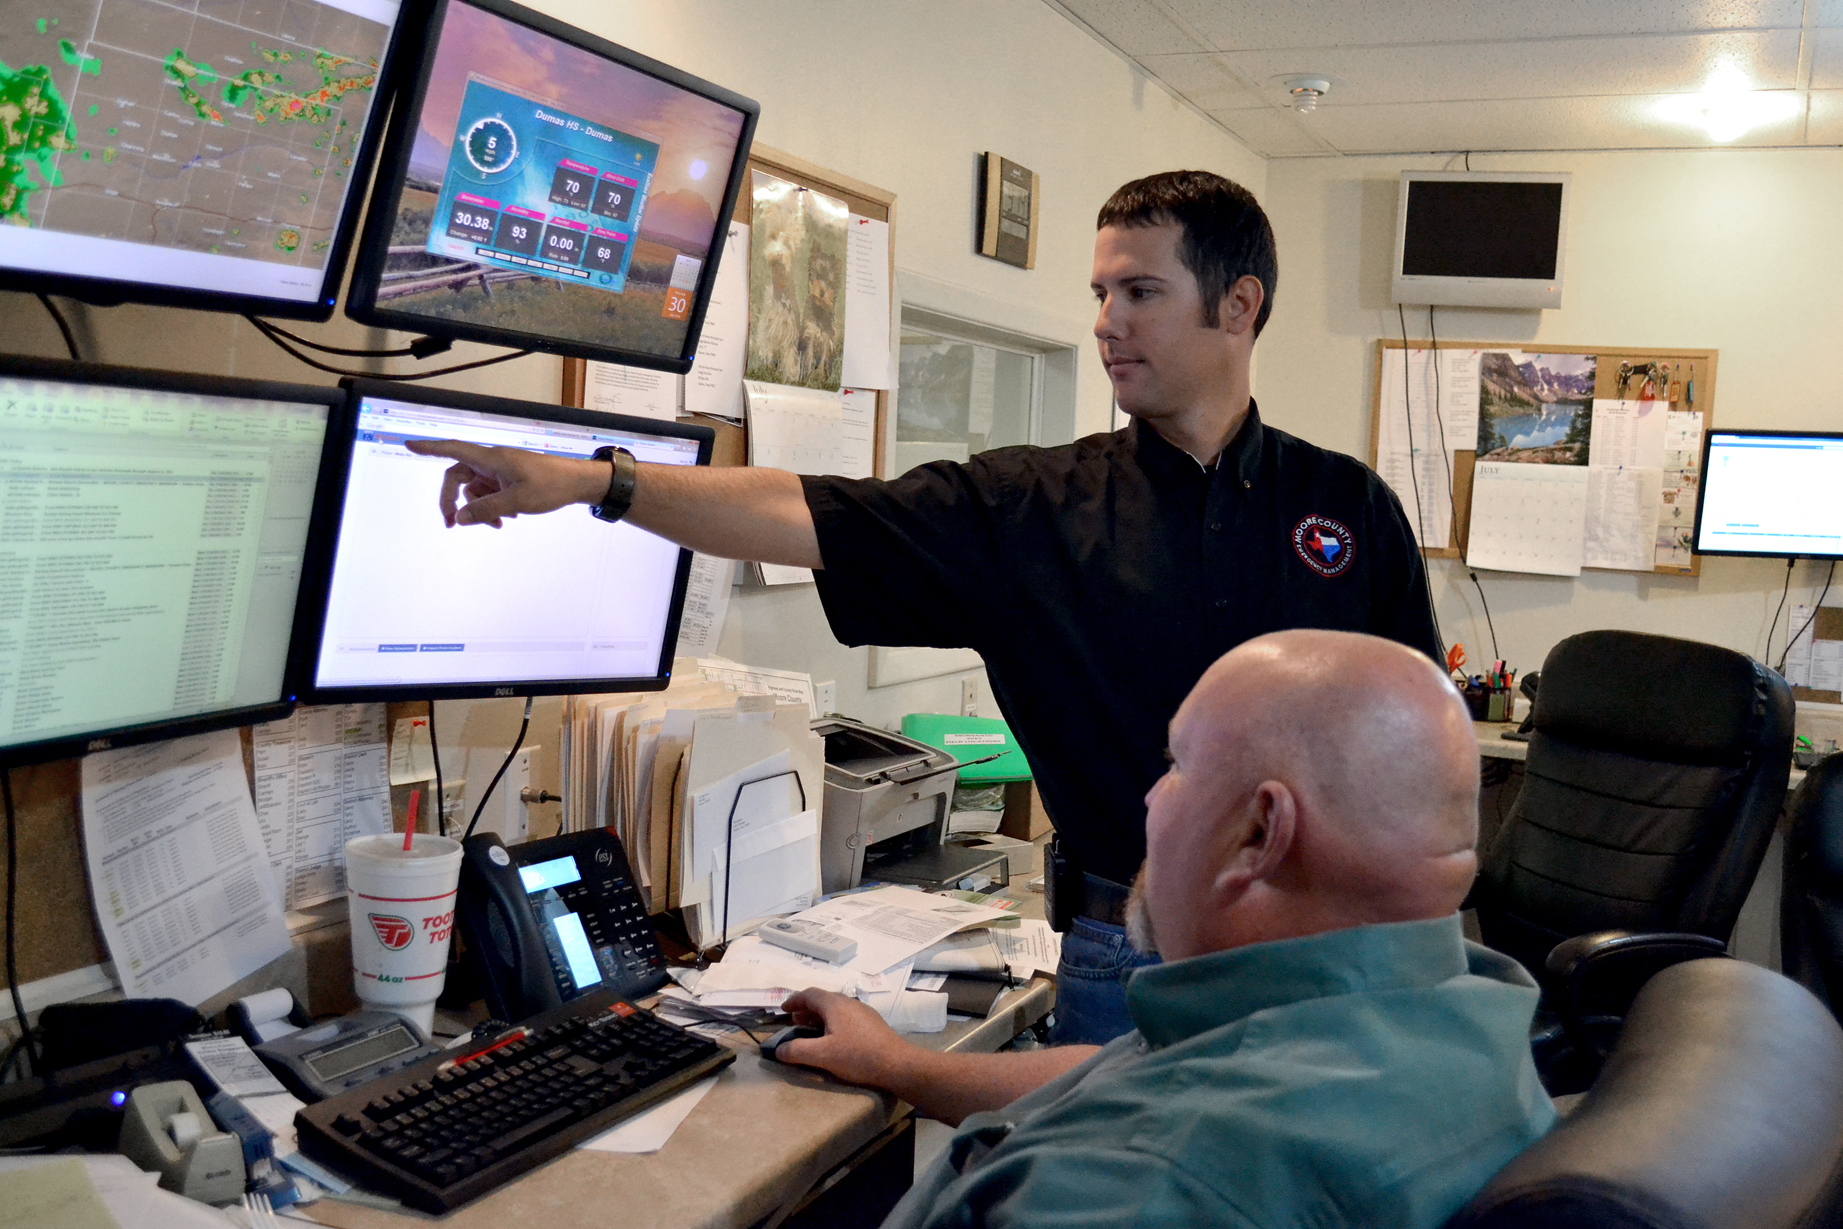 Software lets emergency officials locate special-needs citizens in case of disaster